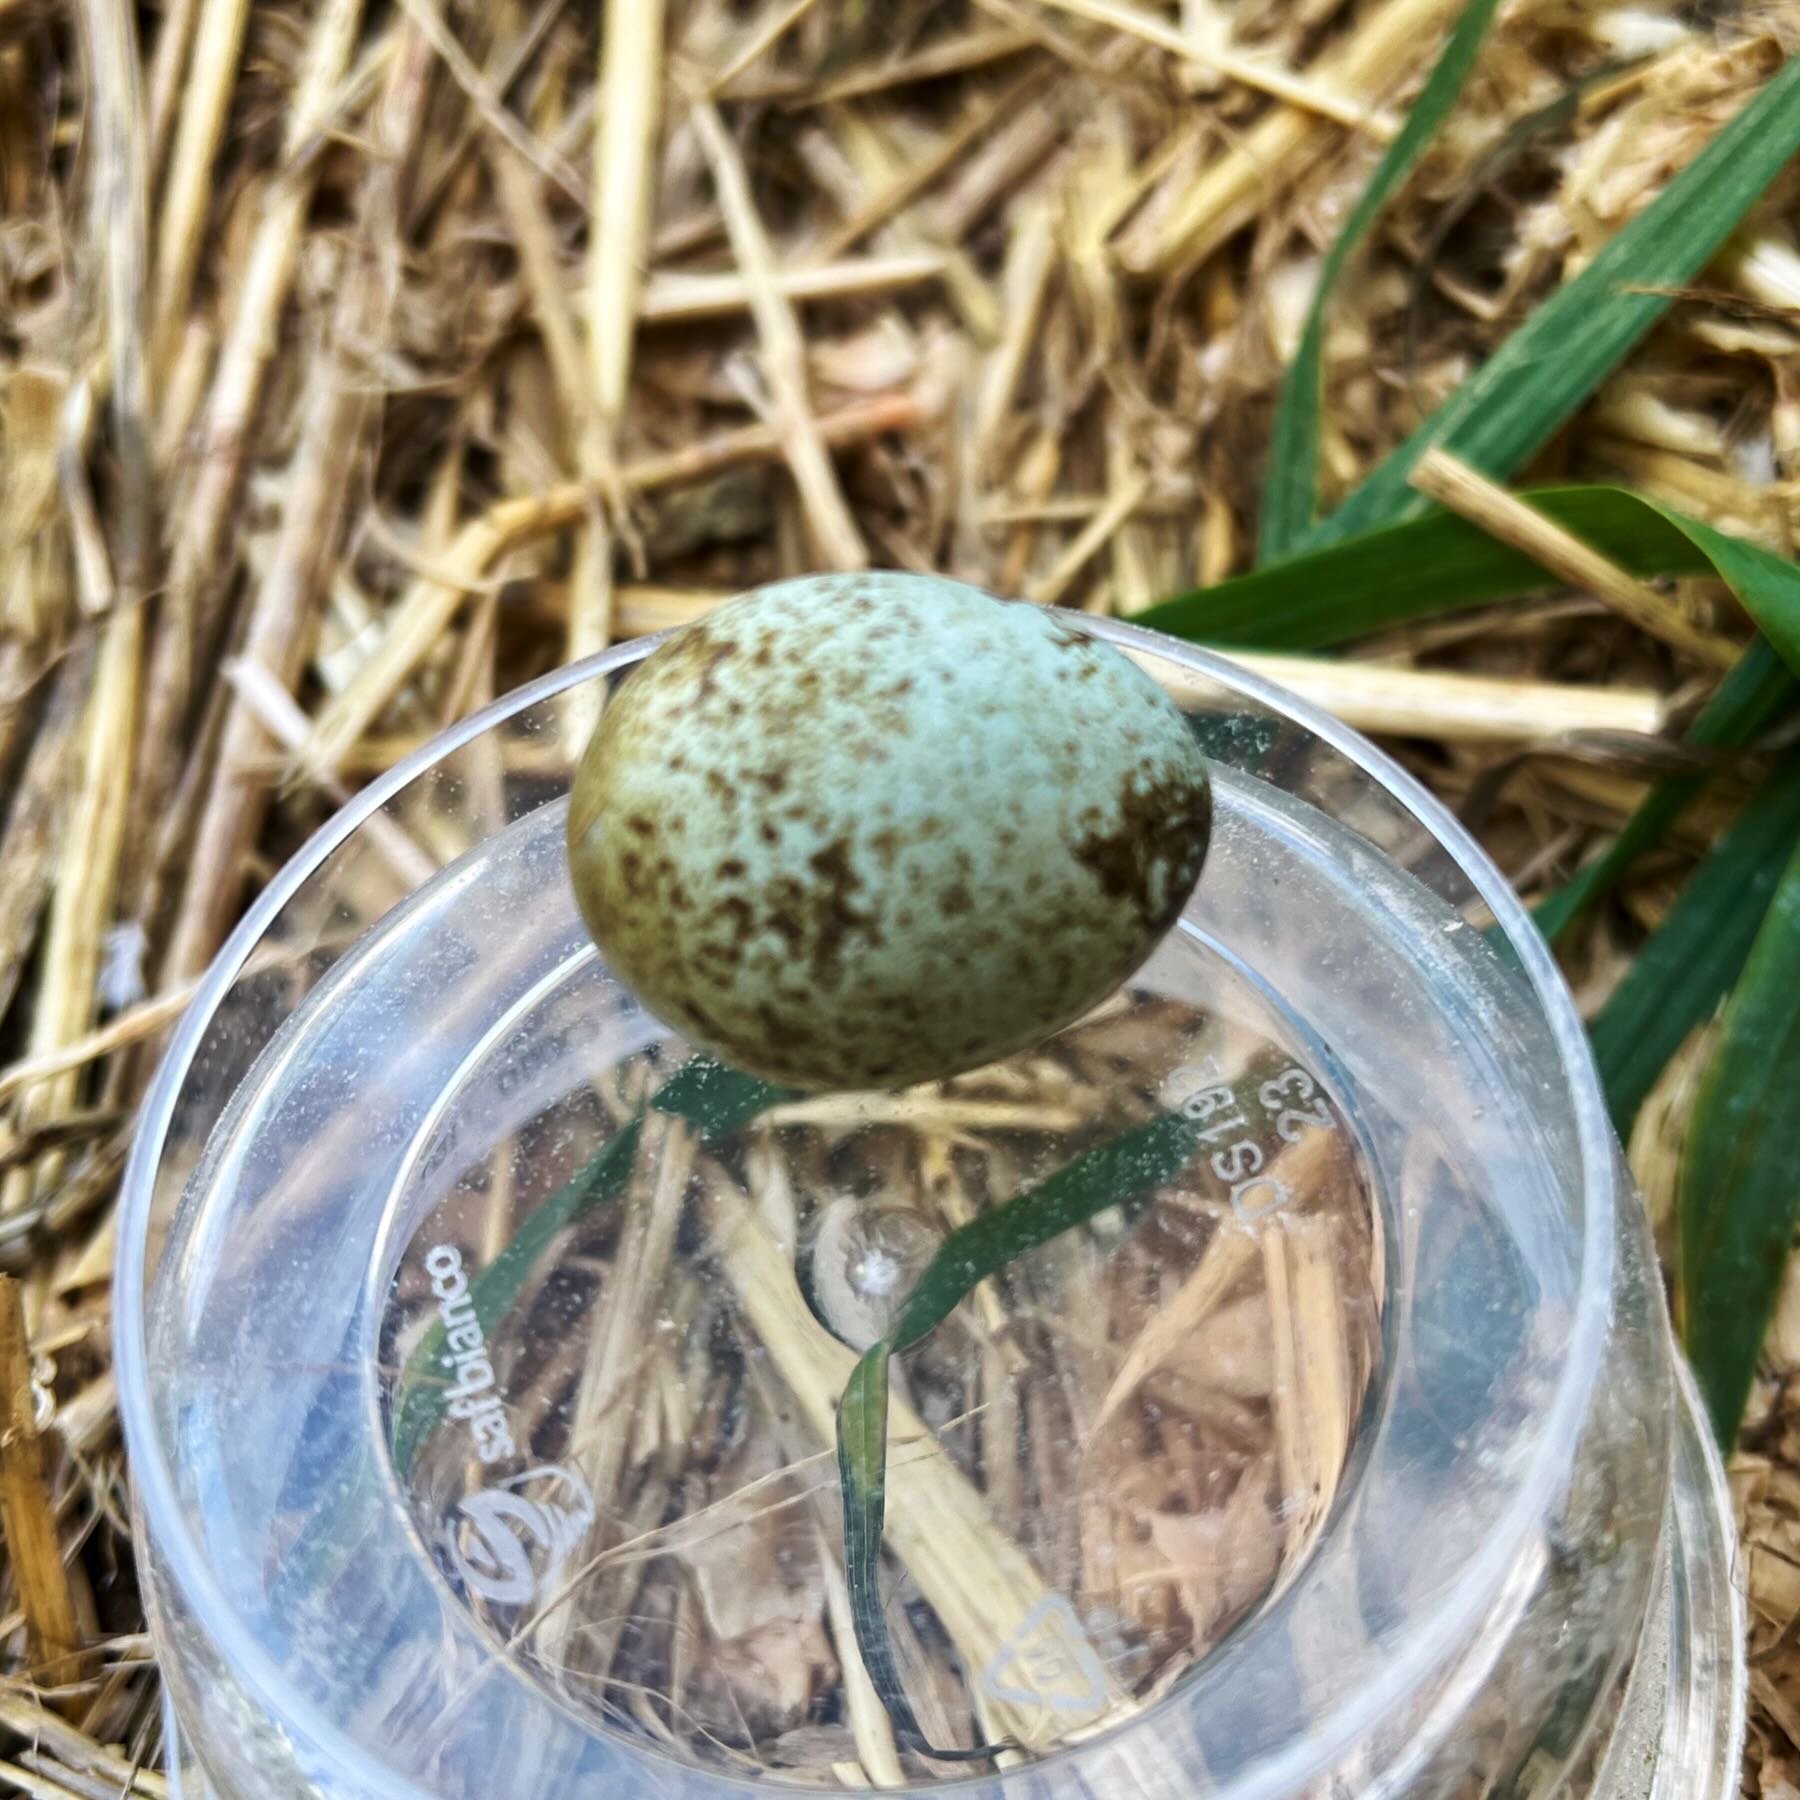 Small egg balanced on a plastic cup.